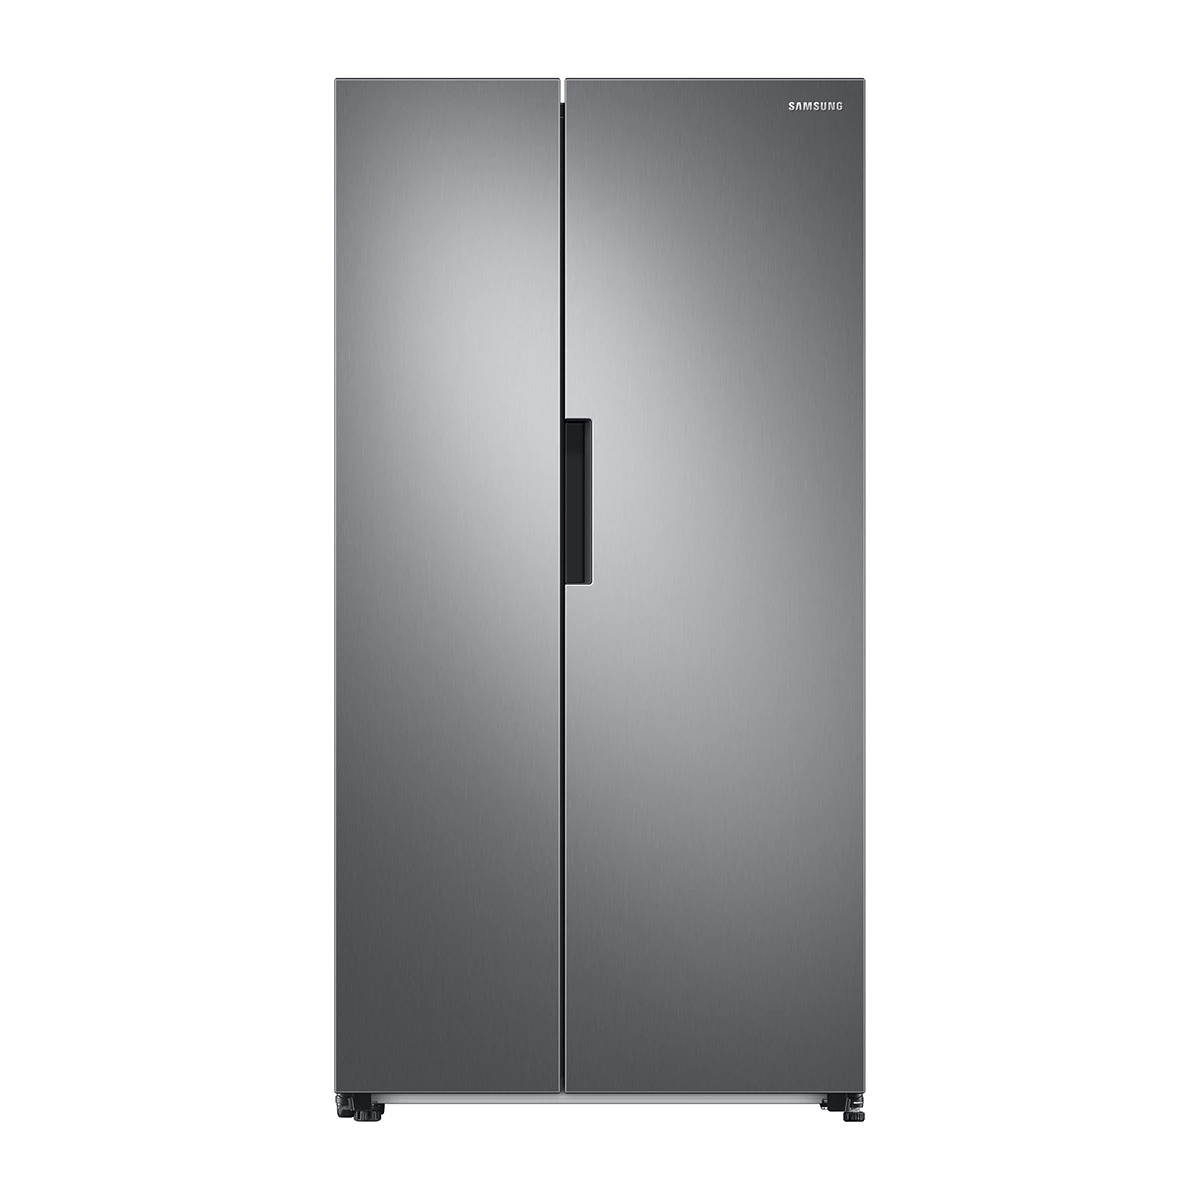 Frigorífico Side by Side Samsung RS66A8101S9/EF no frost